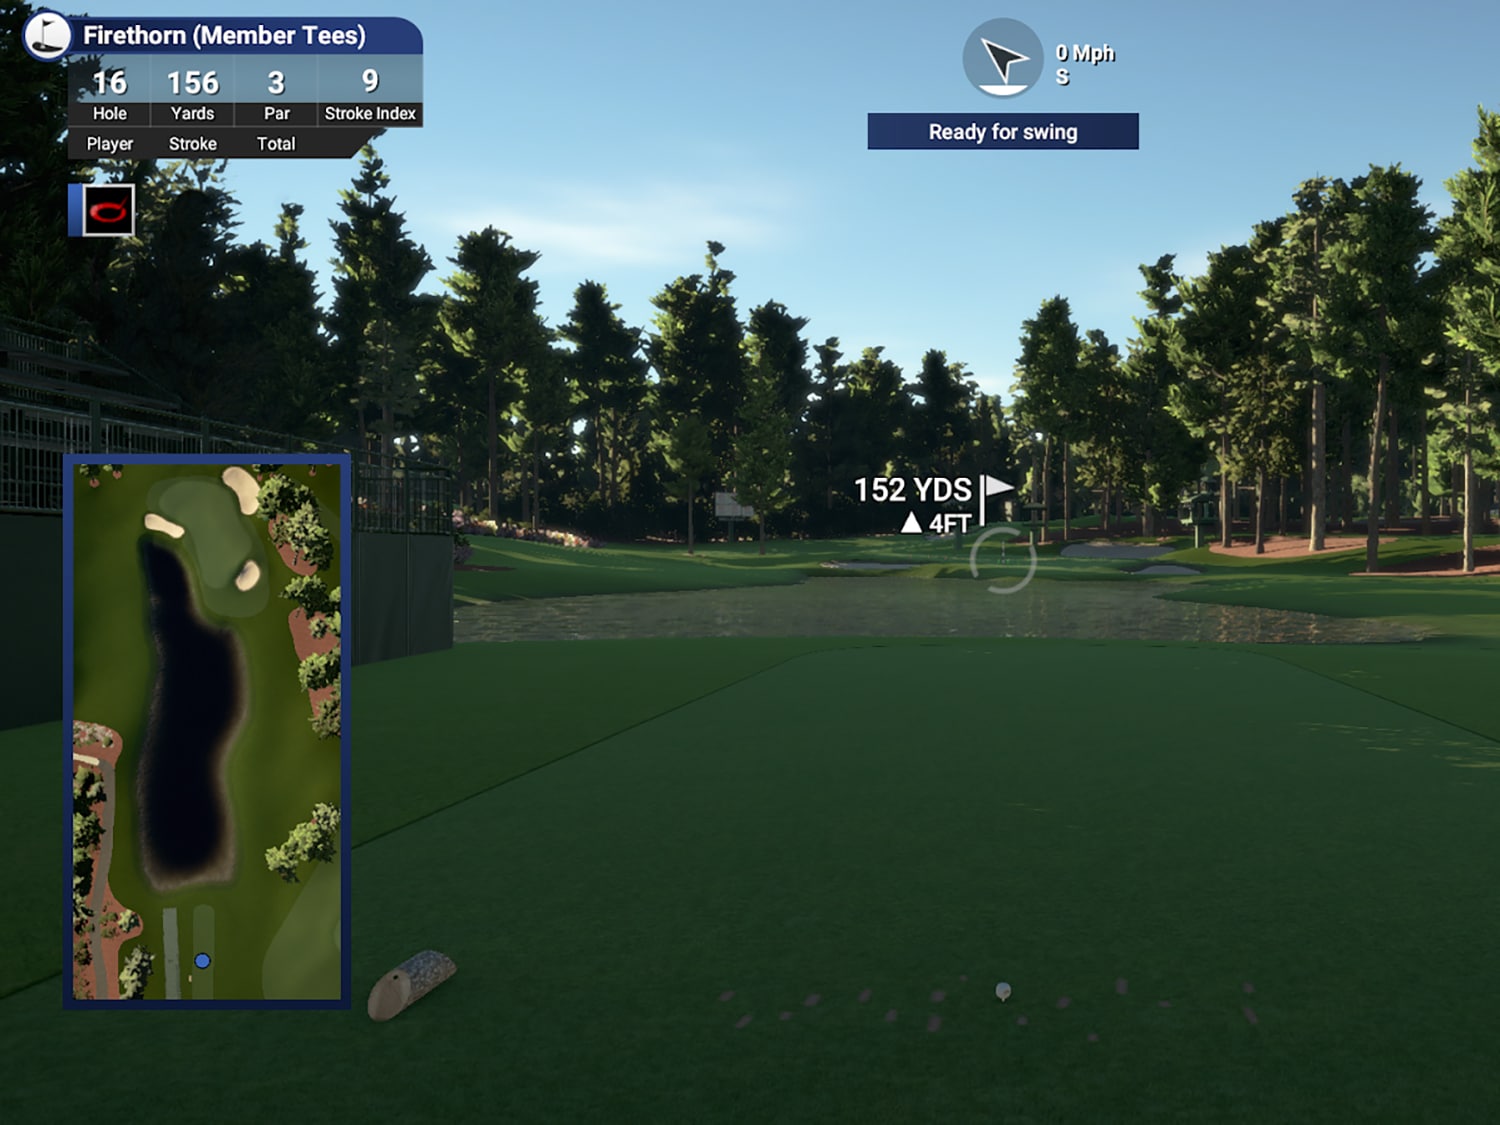 The 16th hole of the “Firethorn” course on golf simulators, which is a similar design to Augusta National.